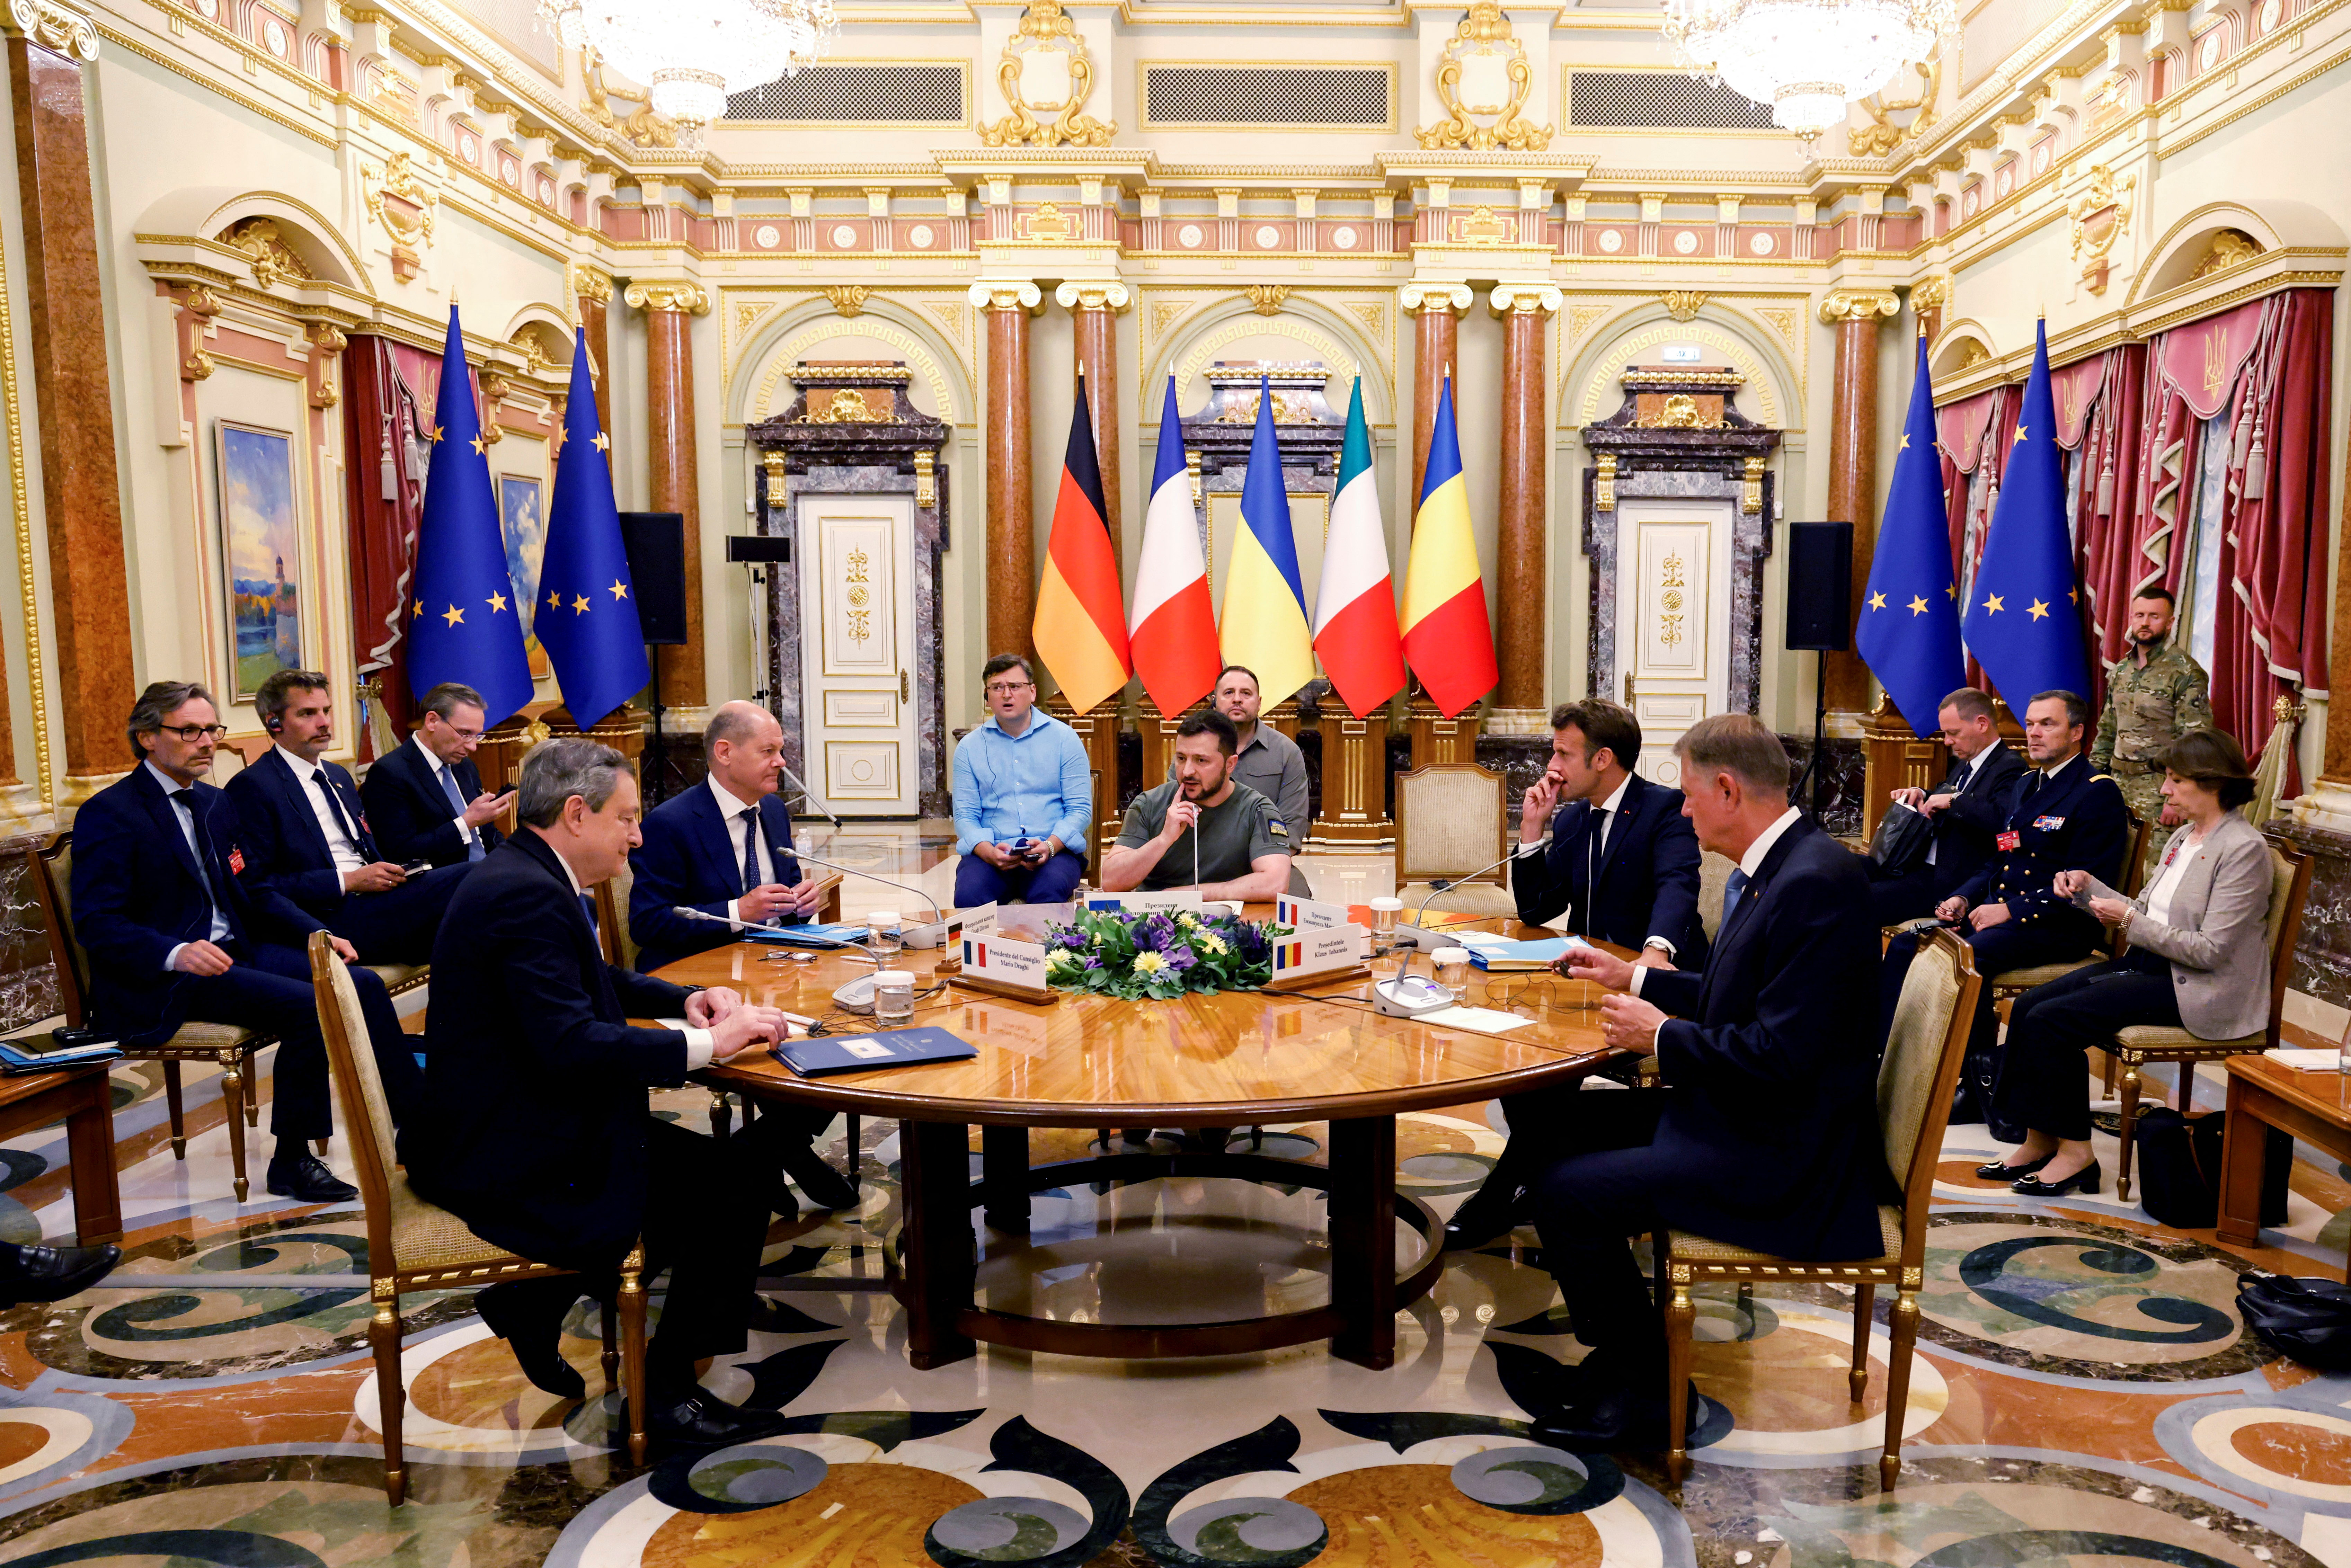 Ukrainian President Volodymyr Zelenskiy, France's President Emmanuel Macron, Italian Prime Minister Mario Draghi, German Chancellor Olaf Scholz and Romanian President Klaus Iohannis meet for a working session in Mariinsky Palace, in Kyiv, Ukraine June 16, 2022. Ludovic Marin/Pool via REUTERS